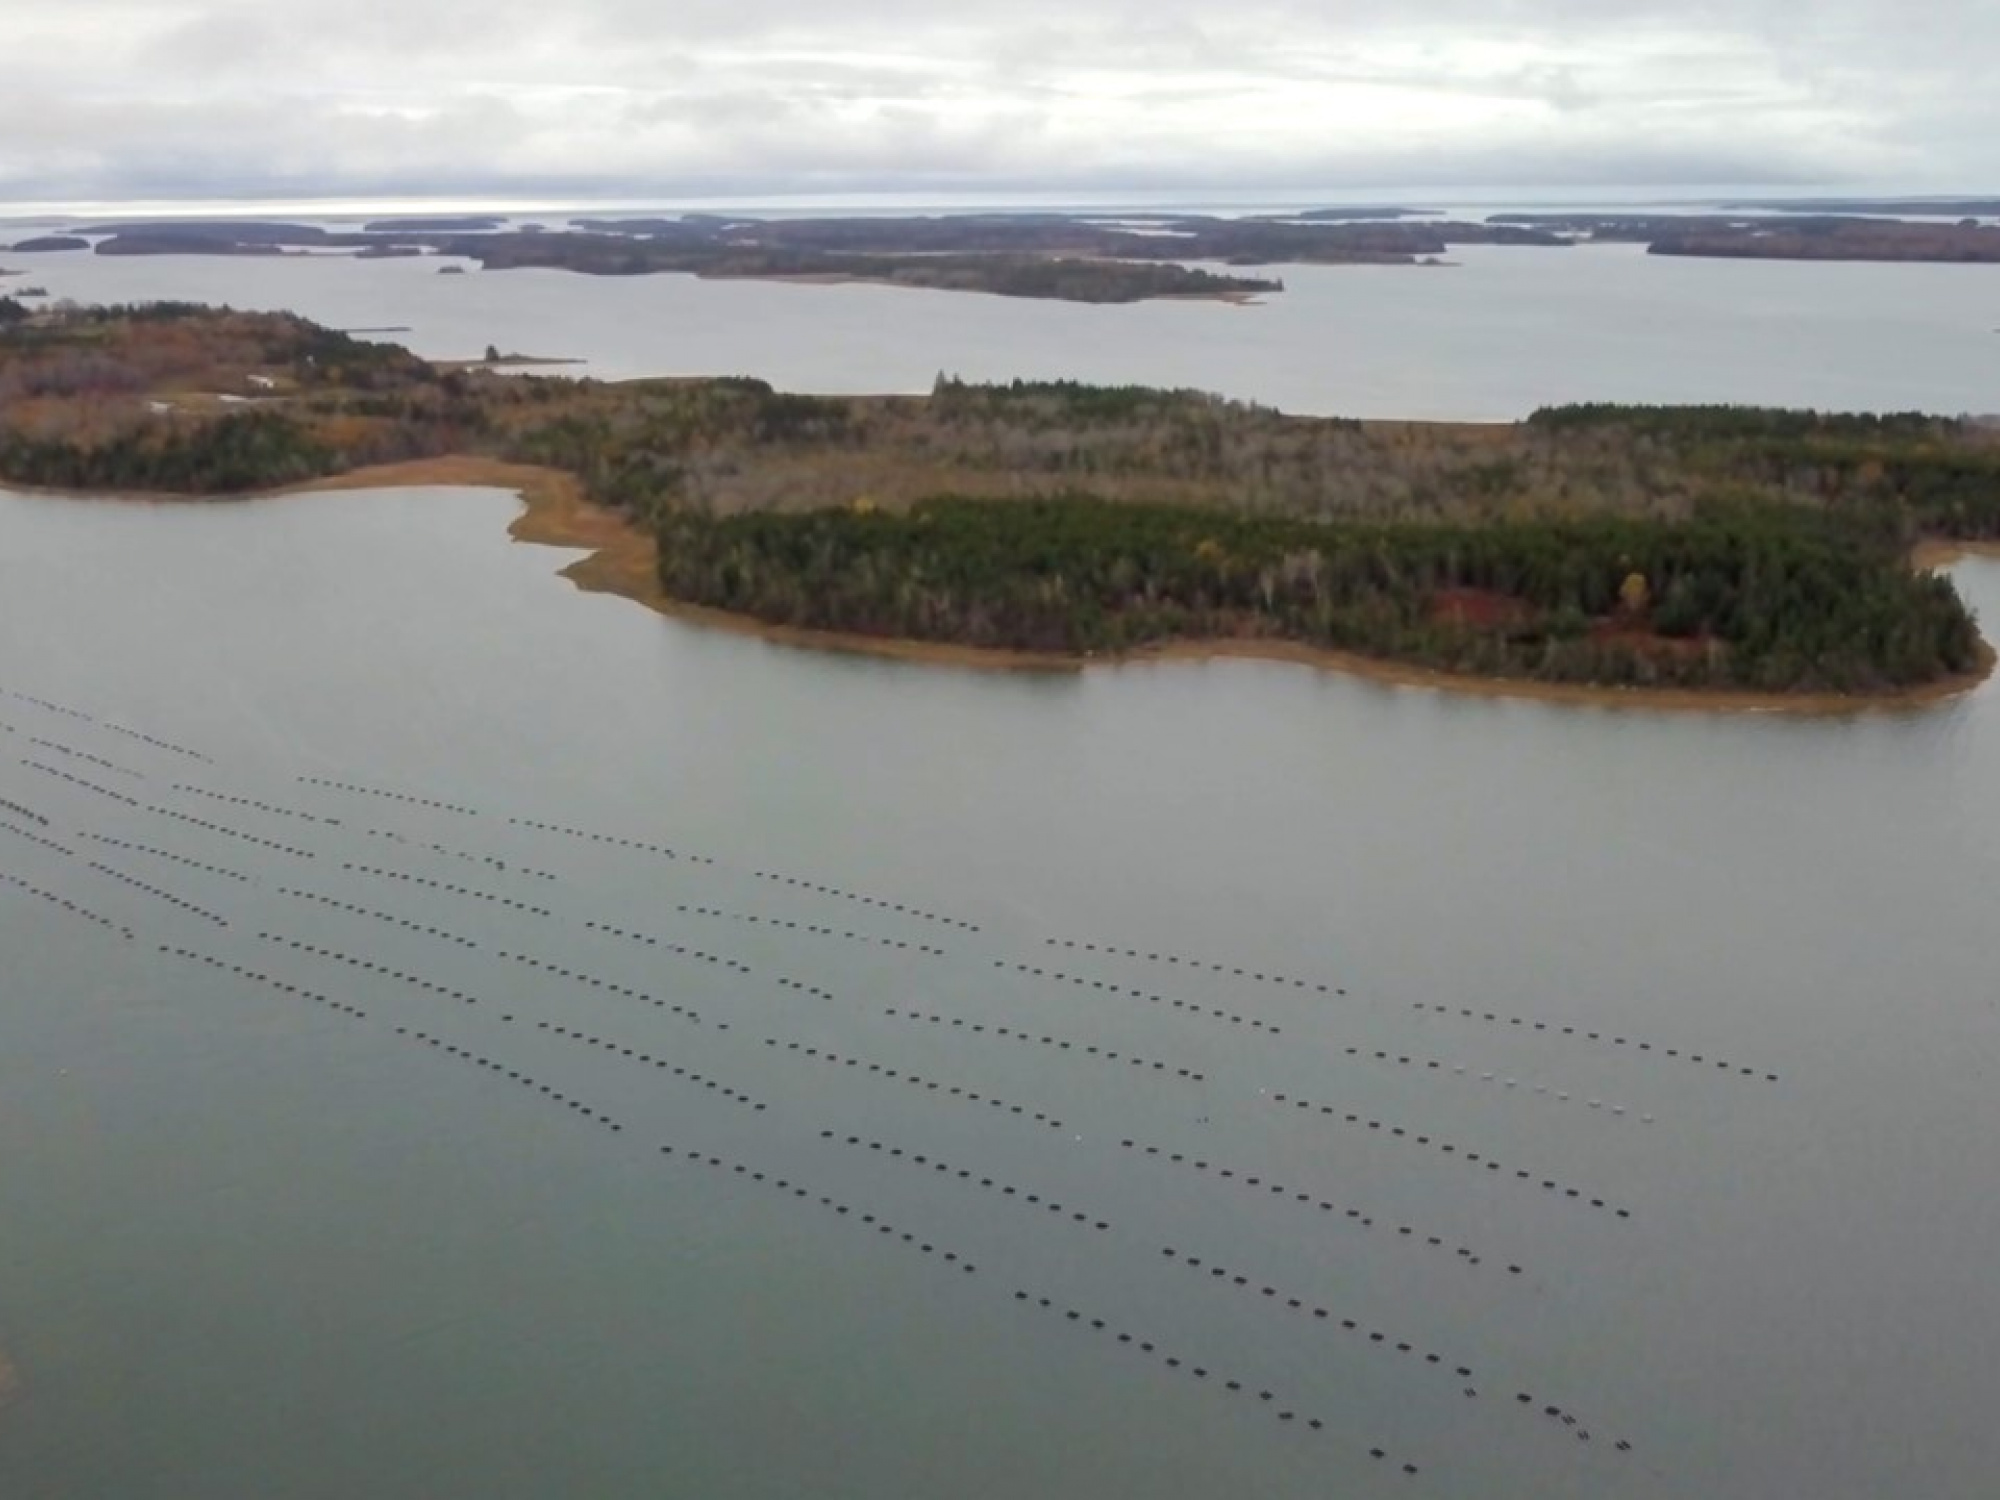 An aquaculture site in the Municipality of the District of Argyle (Centre for Marine Applied Research / Perennia)